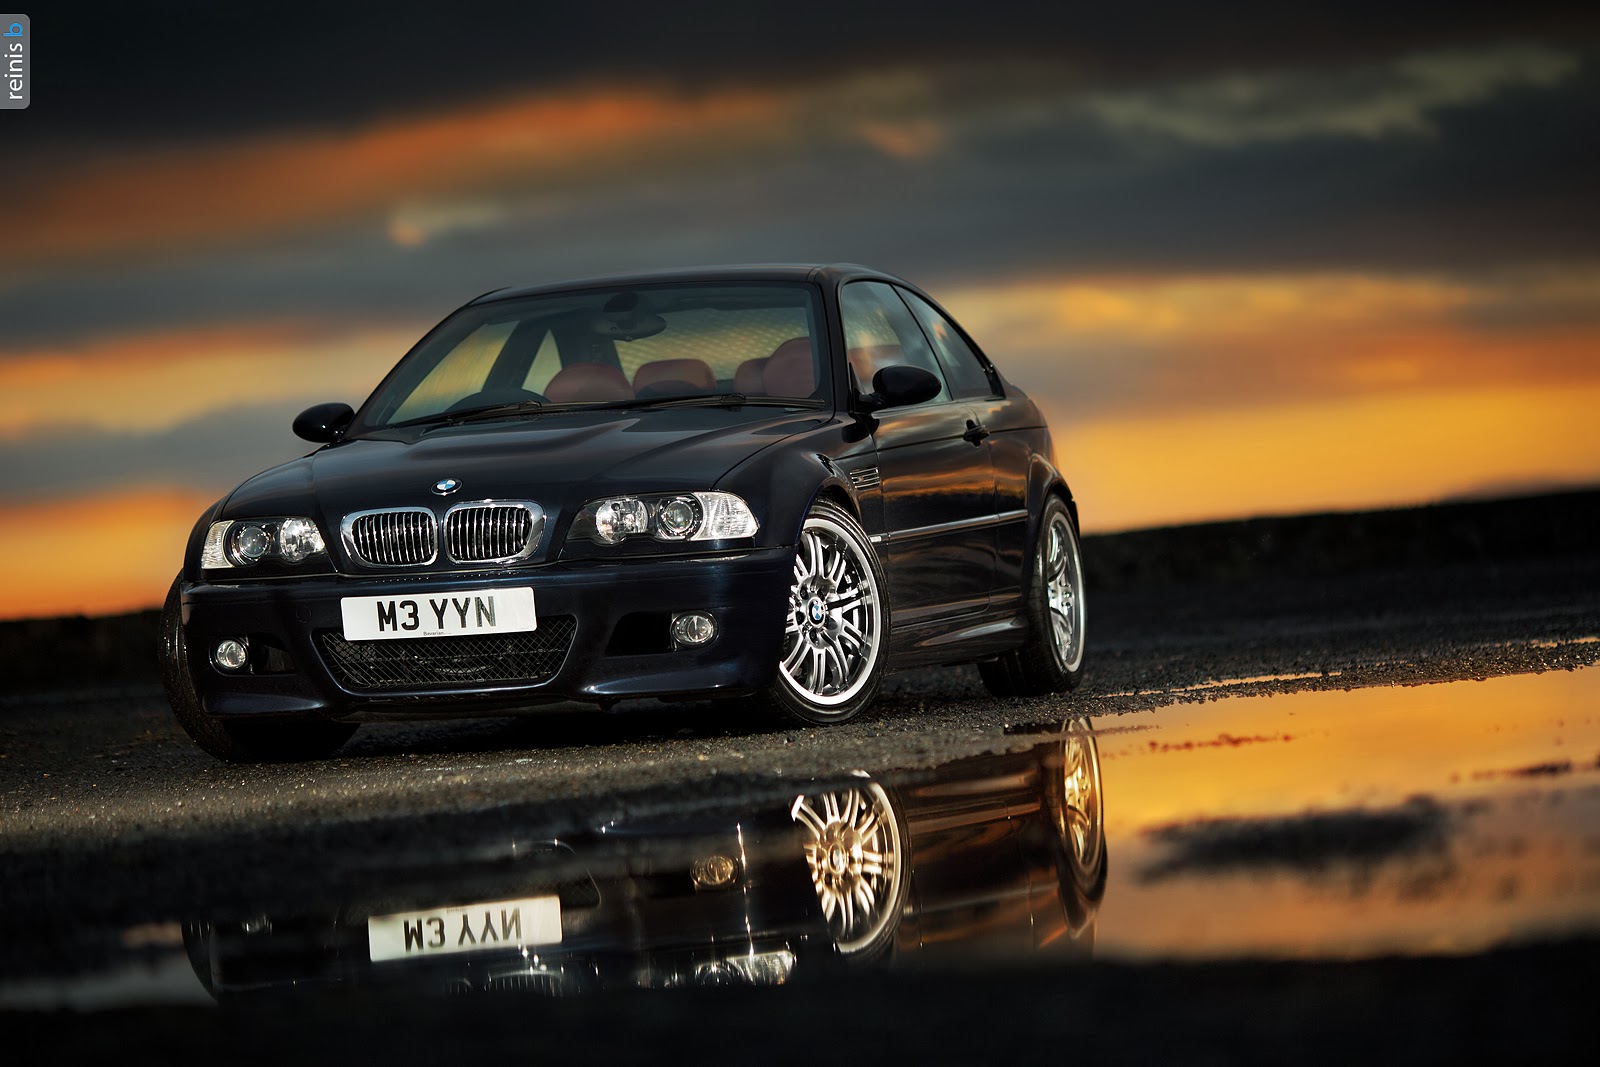 Bmw e46 hi-res stock photography and images - Alamy